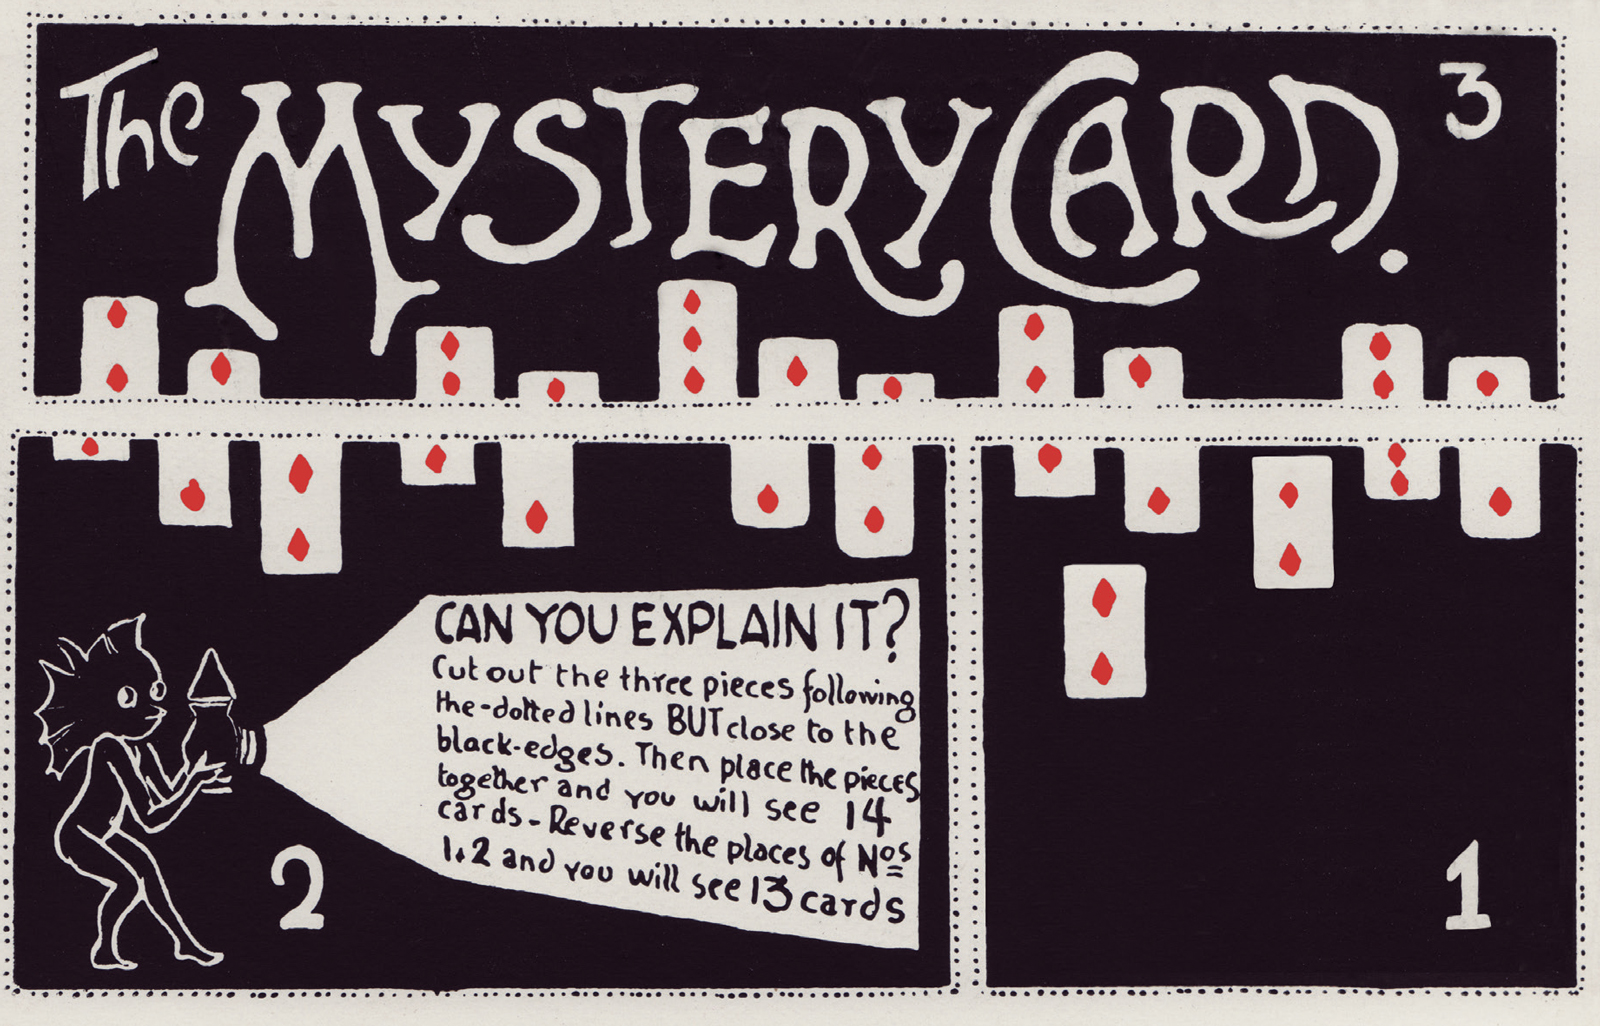 The front of the issue’s postcard featuring a visual puzzle called “The Mystery Car.”